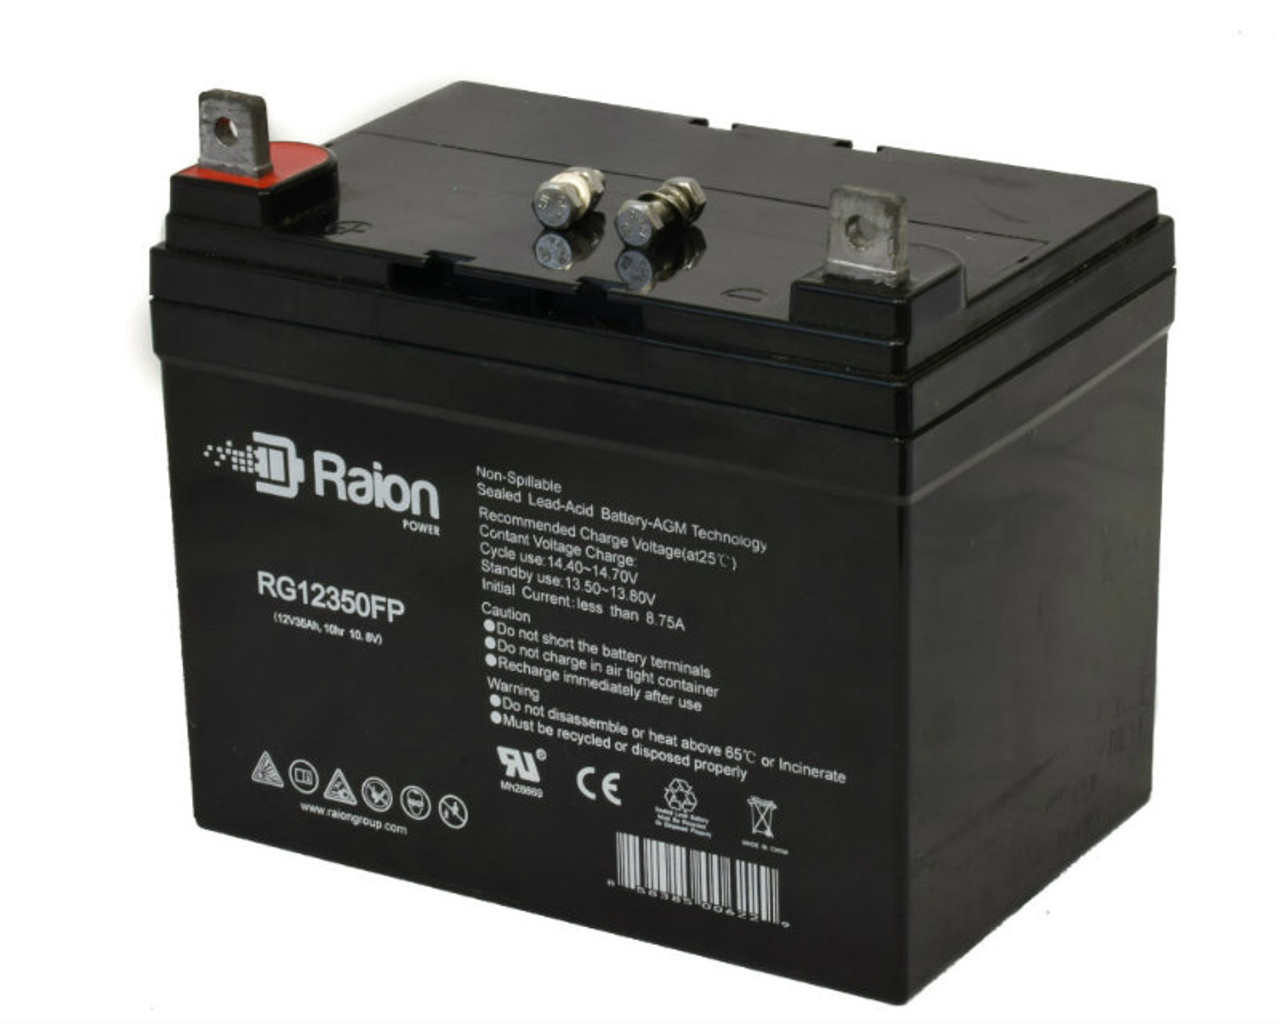 Raion Power Replacement 12V 35Ah RG12350FP Battery for Axyl AXB12300